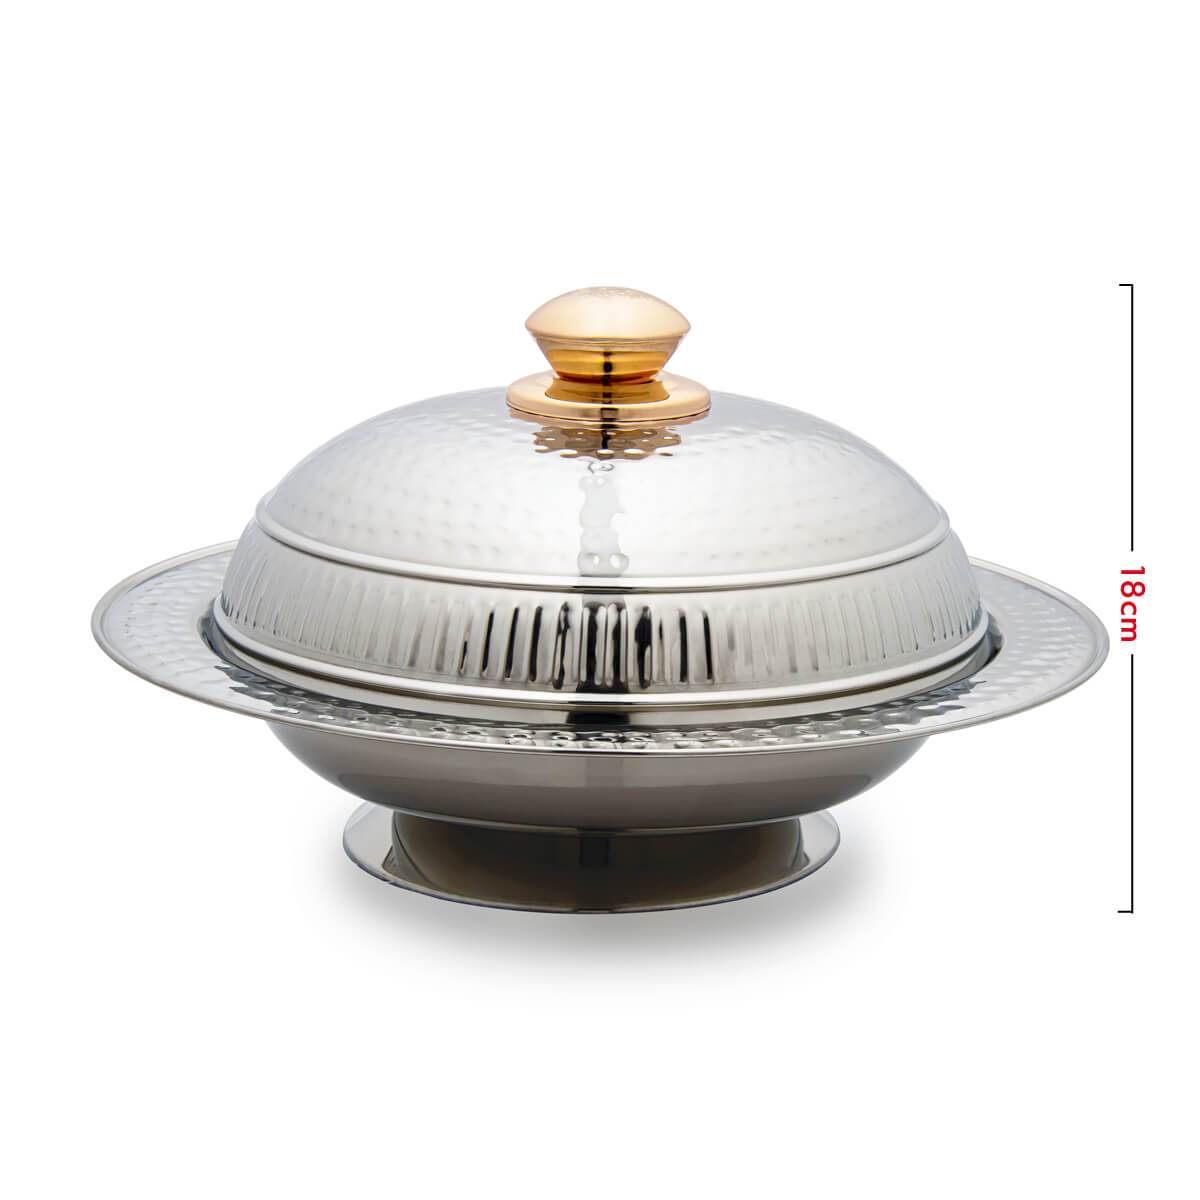 APS Luxury serving dishes stainless steel 26,5x19,5x3,5 cm